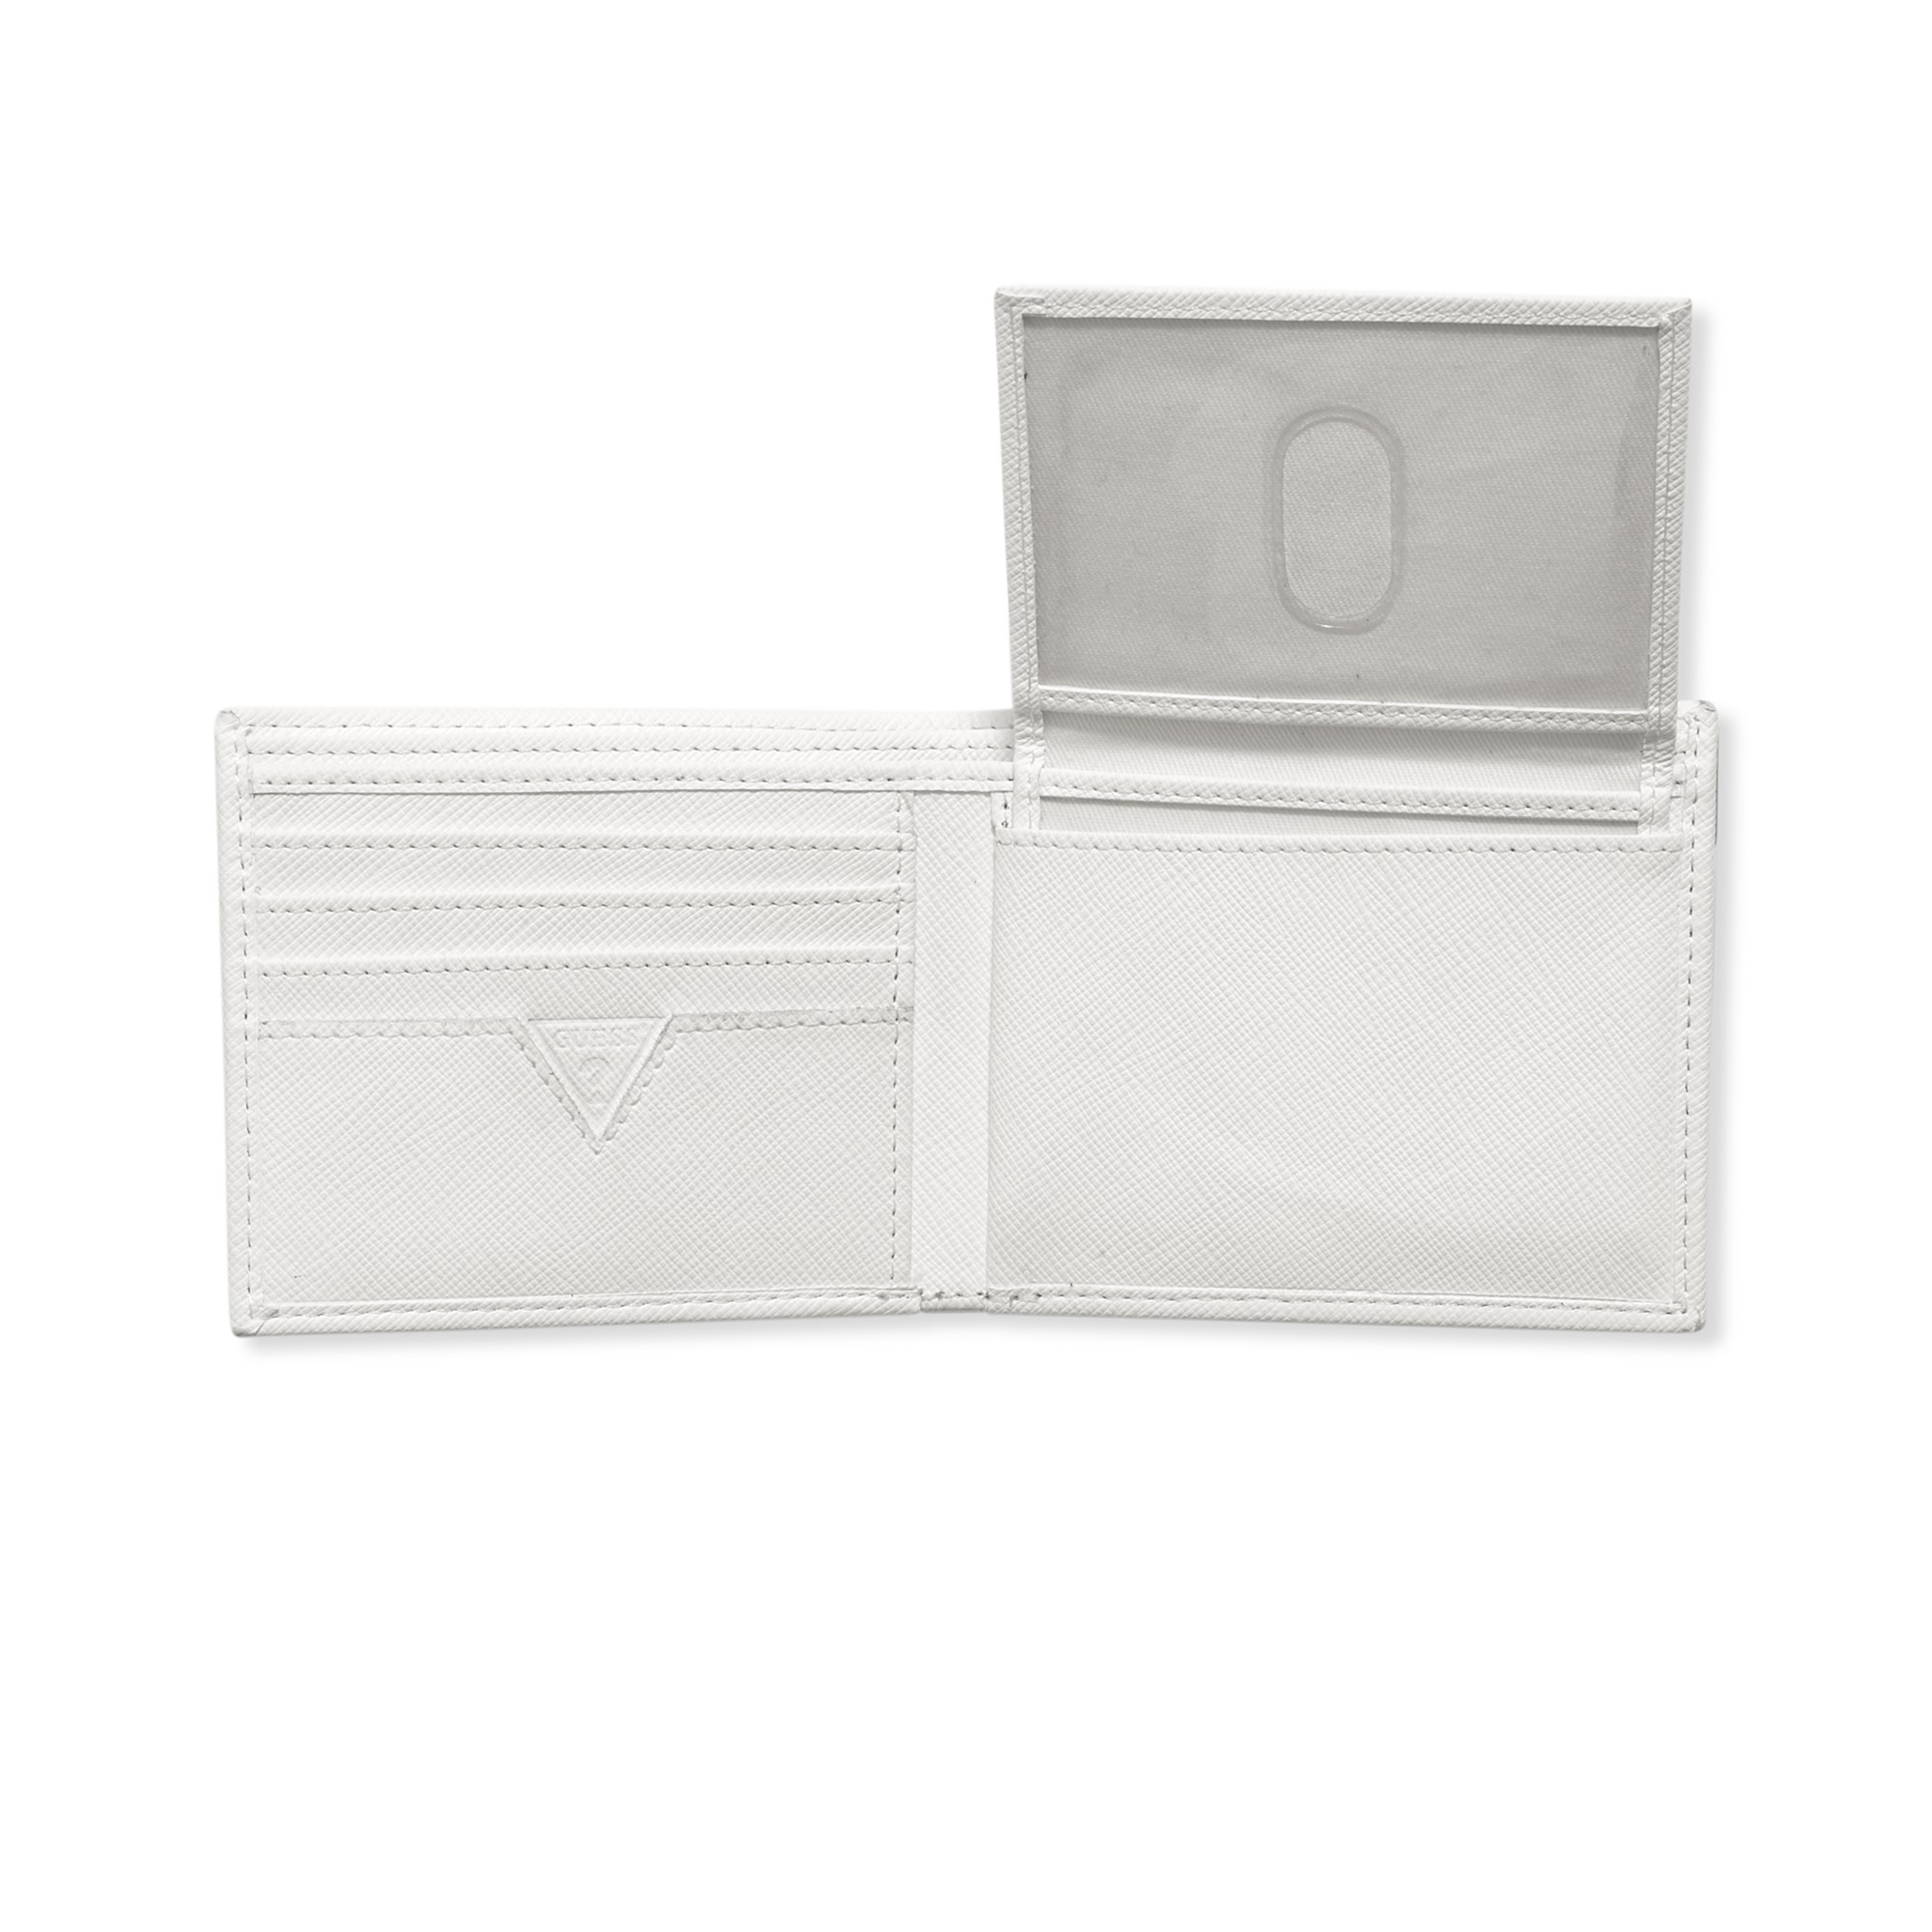 Guess Wallets Sarasota Passcase Wallet in White for Men - Lyst